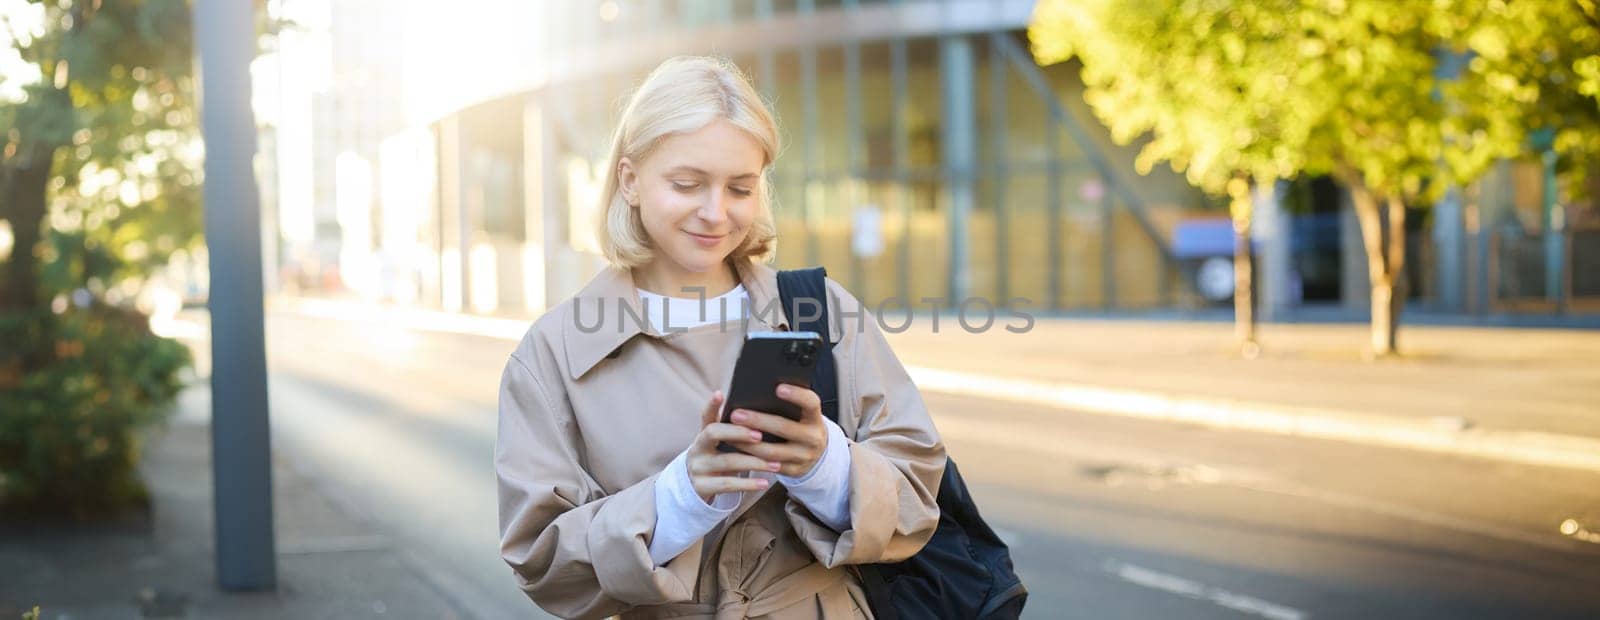 Street style portrait of blonde smiling woman walks on street, sunny bright day, holding smartphone, carries backpack, orders taxi on mobile application, sends message on cell phone.